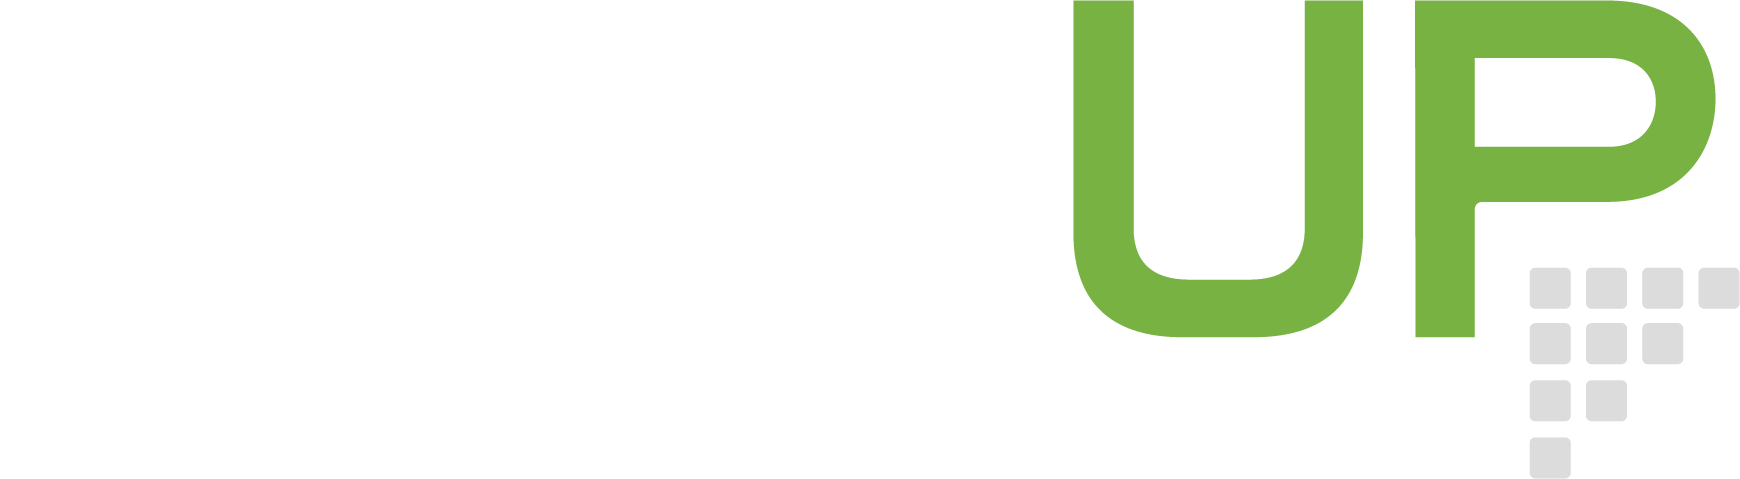 RevUp Growth Partners